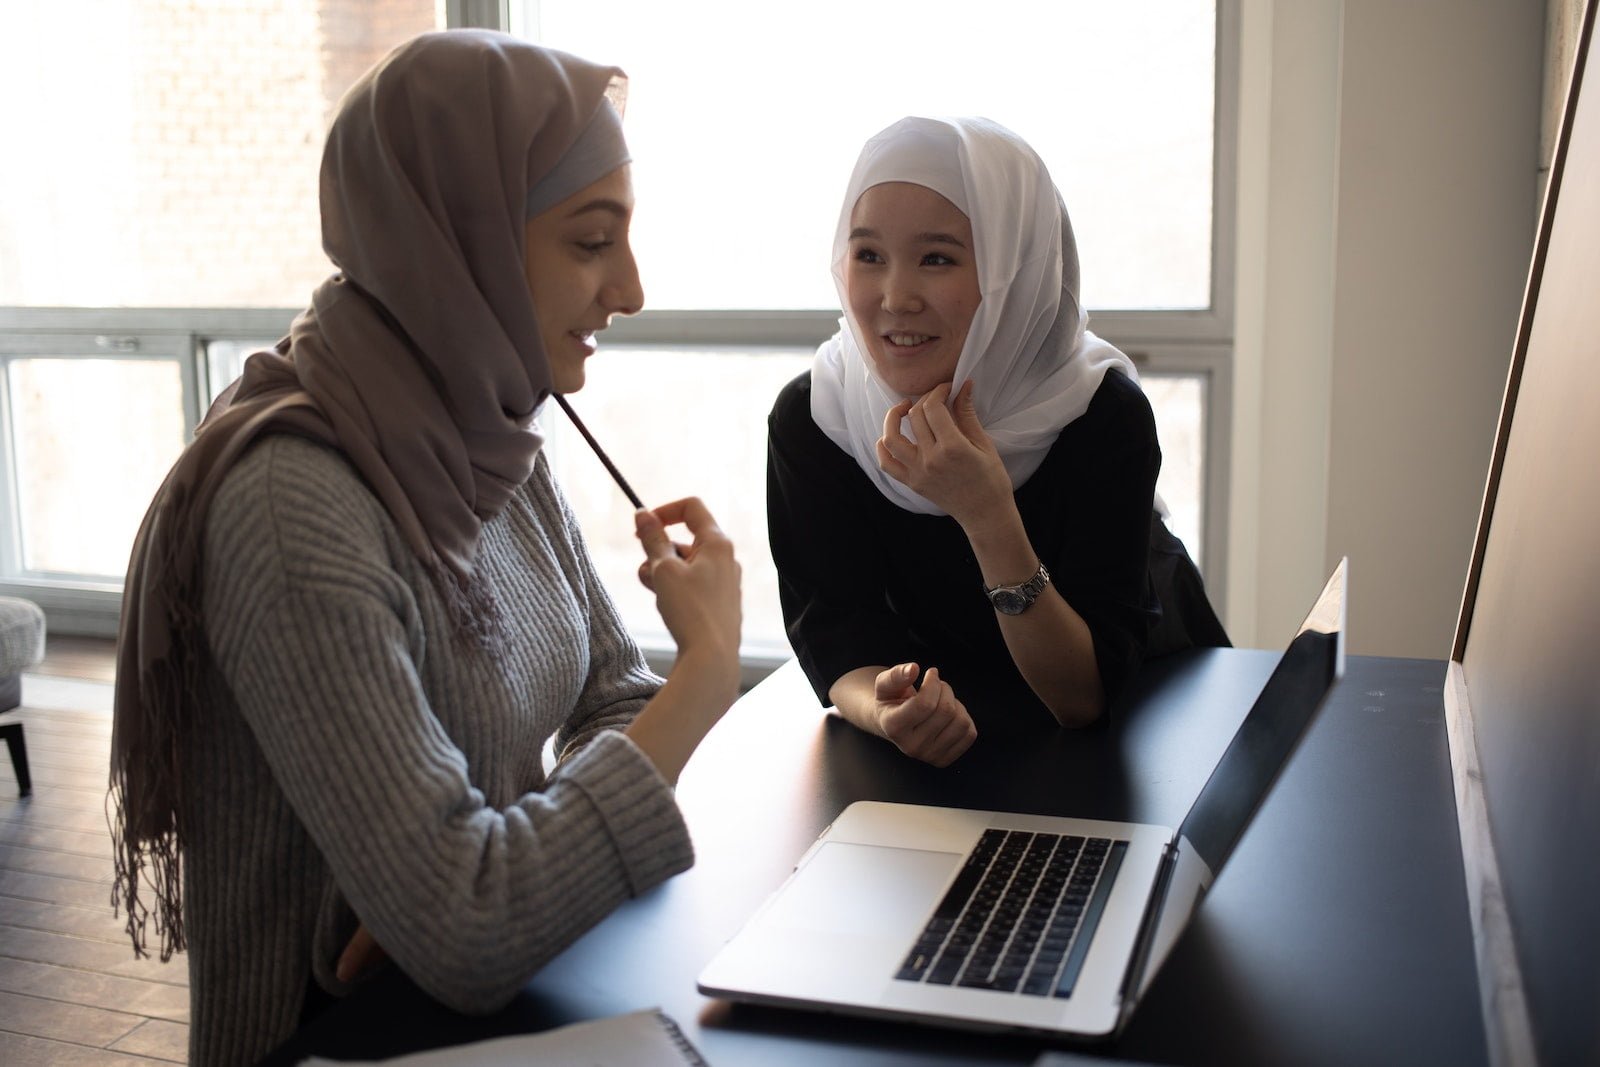 Positive multiethnic Muslim female students in traditional headscarves sitting at table and surfing netbook while preparing for lesson together in university